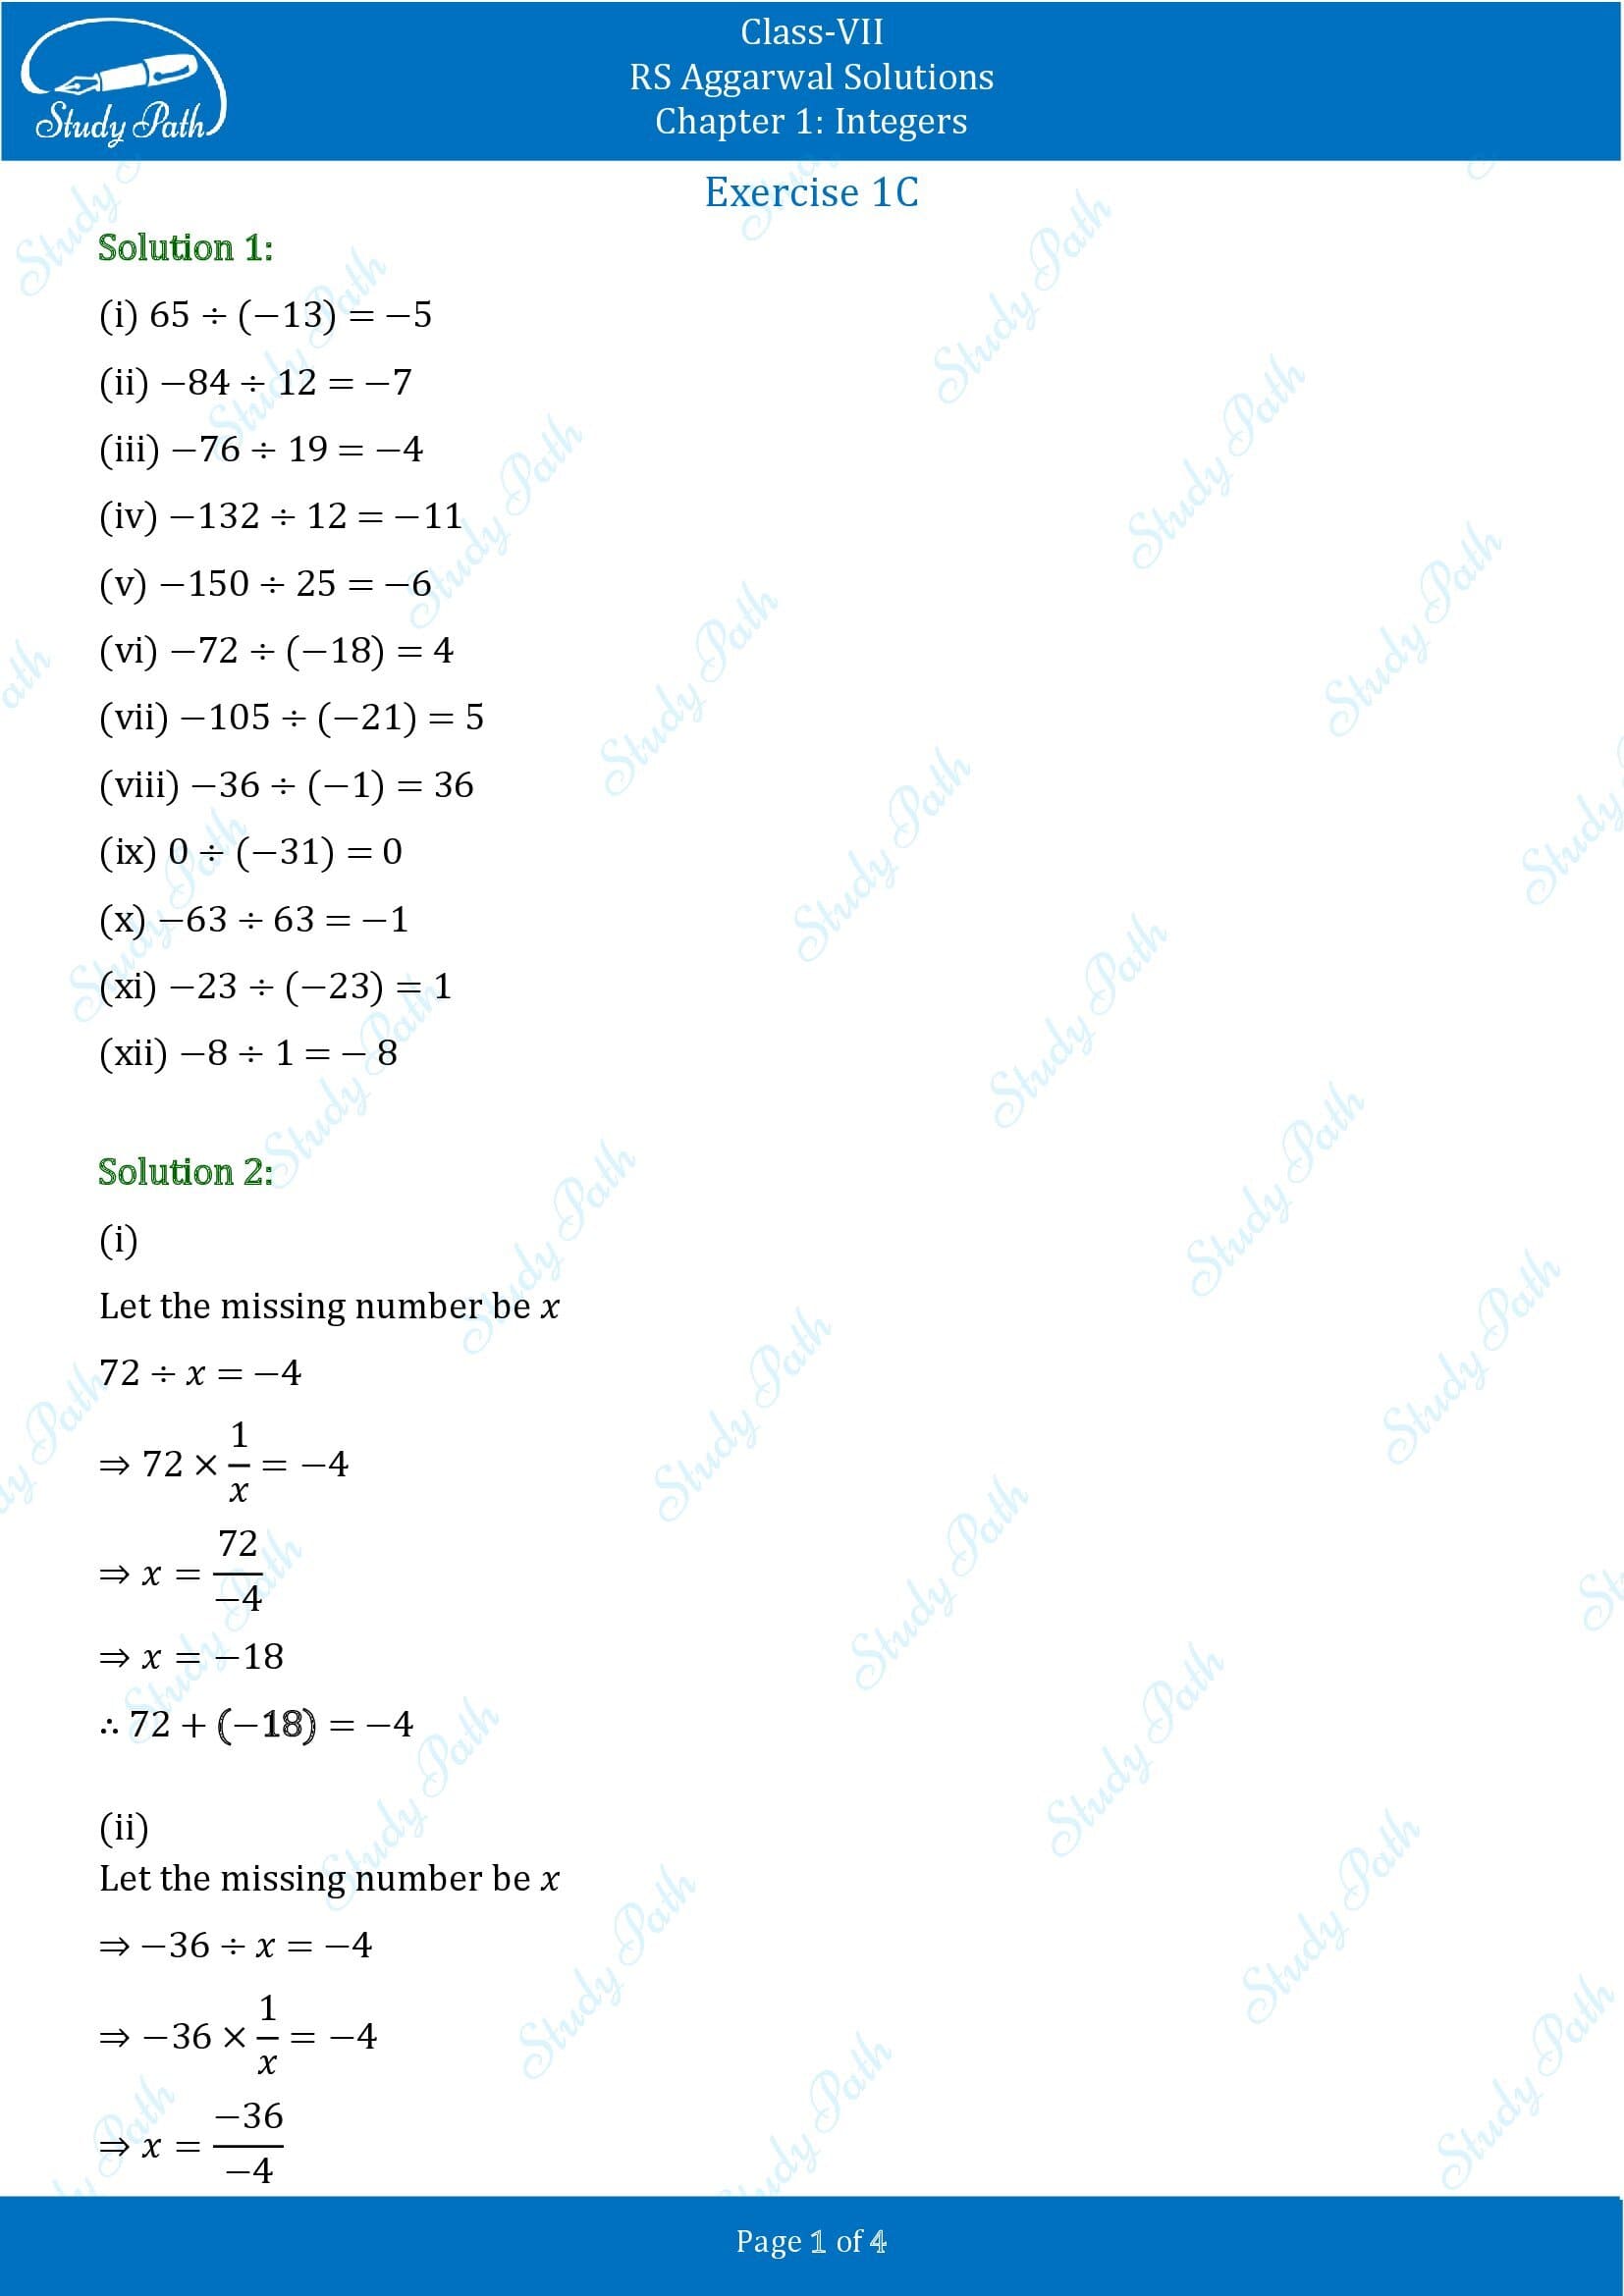 RS Aggarwal Solutions Class 7 Chapter 1 Integers Exercise 1C 001